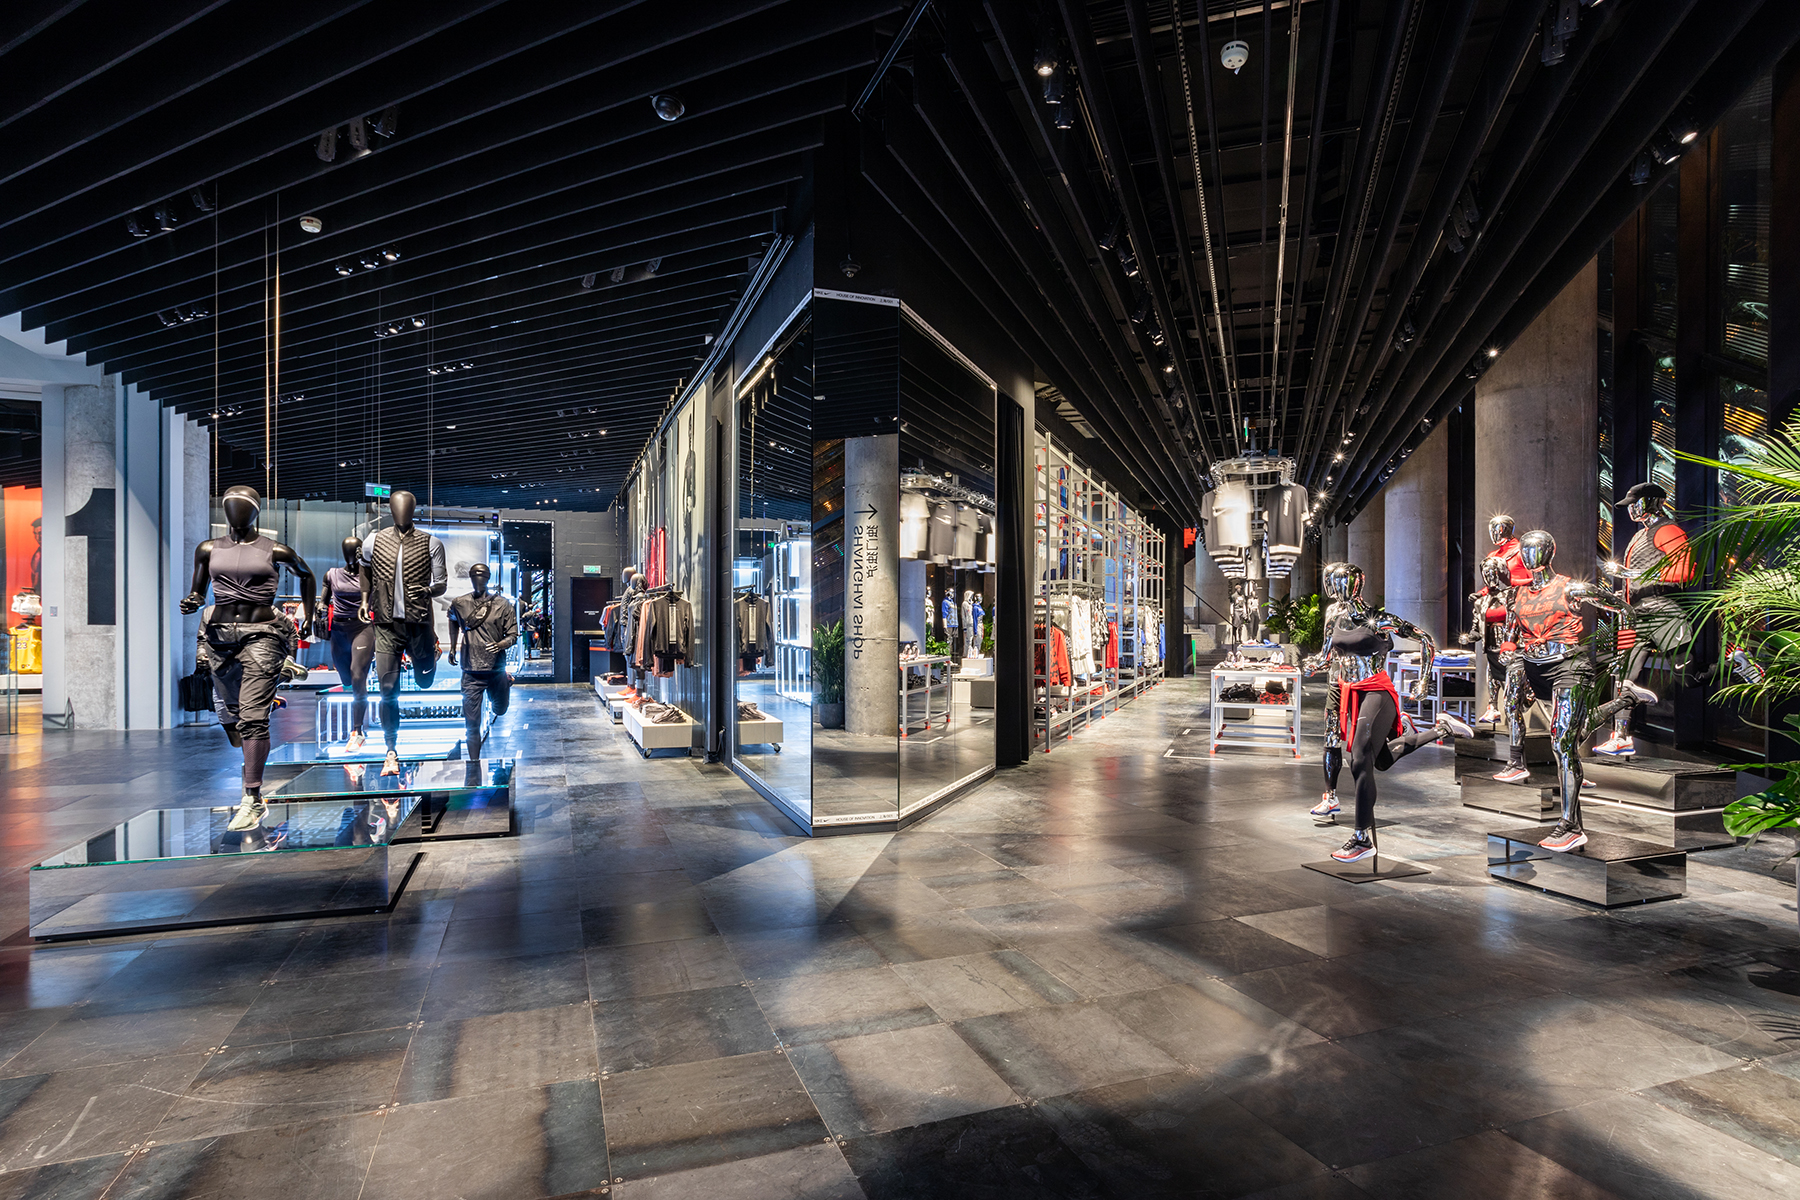 Creative Concept Direction by Nike Retail Design, Interior Design by Callison RTKL, Lighting Design by Studio Illumine, Photography by Xuzhe for Tophoto